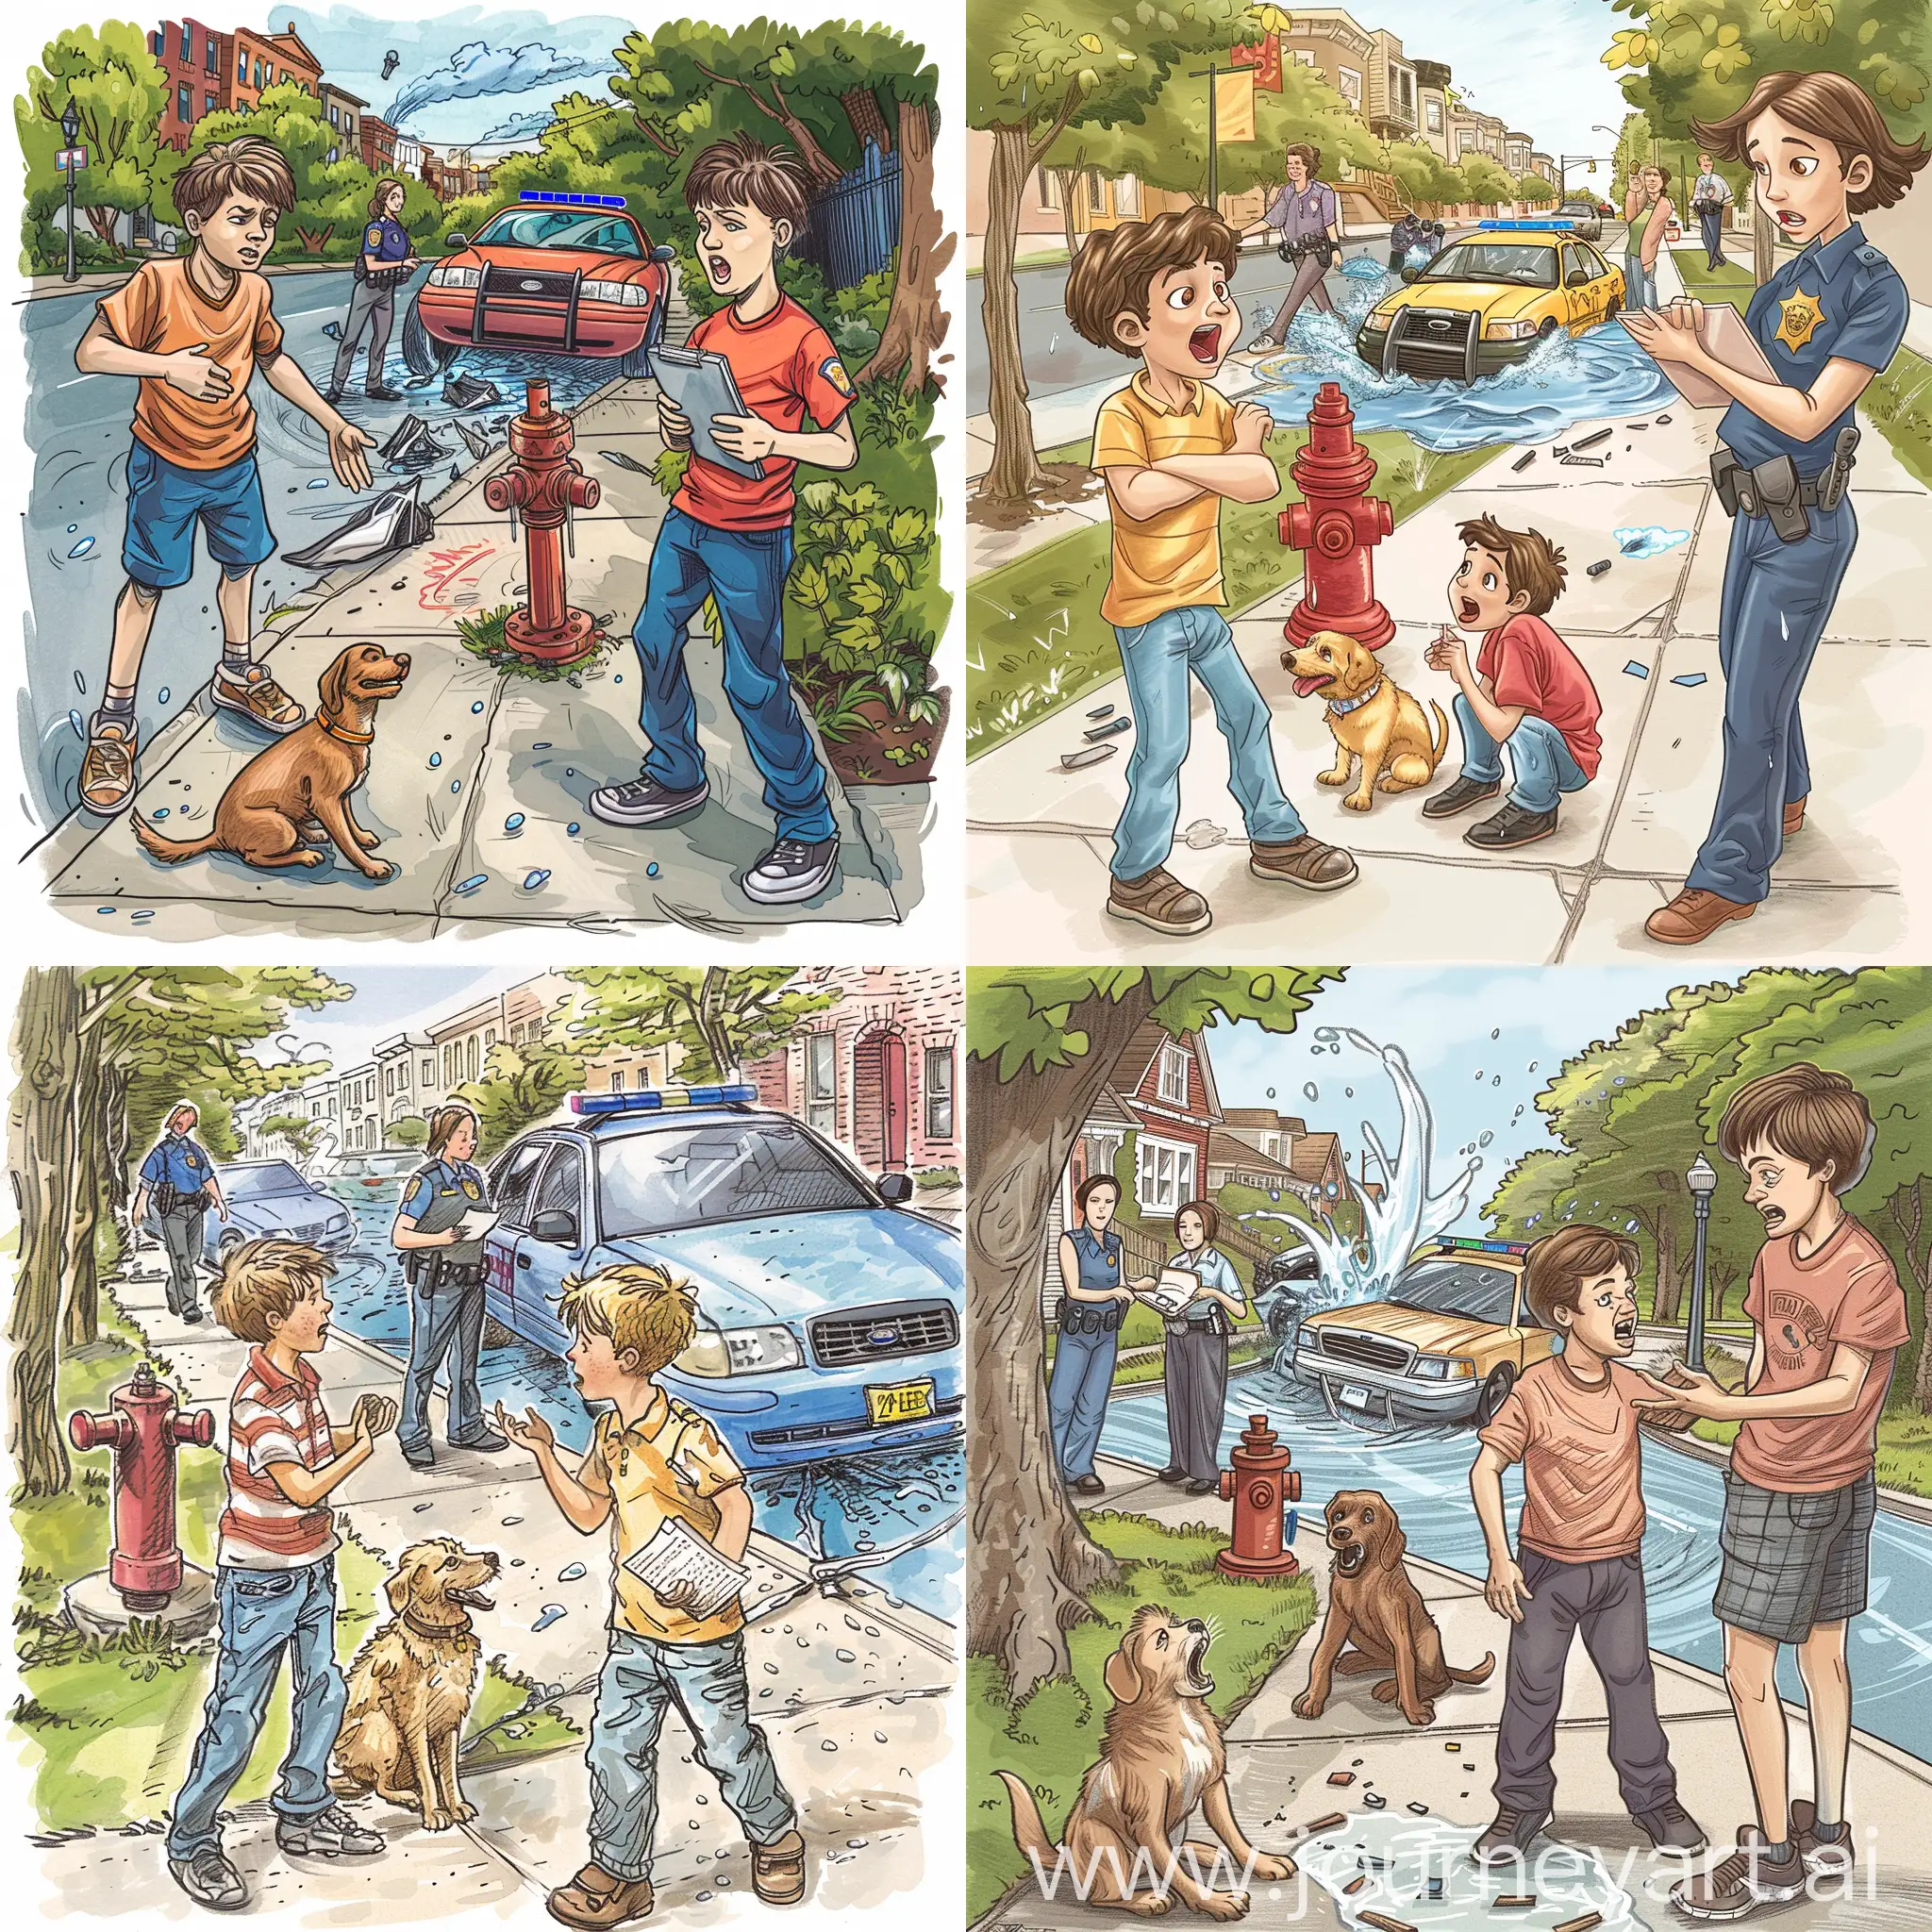 draw an illustration of two boys arguing on a sidewalk, a dog sitting on the sidewalk beside them, in the background is a car accident with the car banged into a fire hydrant and water splashing from it, next to it is a policewoman making a note of the accident and a woman driving instructor next to her with a writing pad